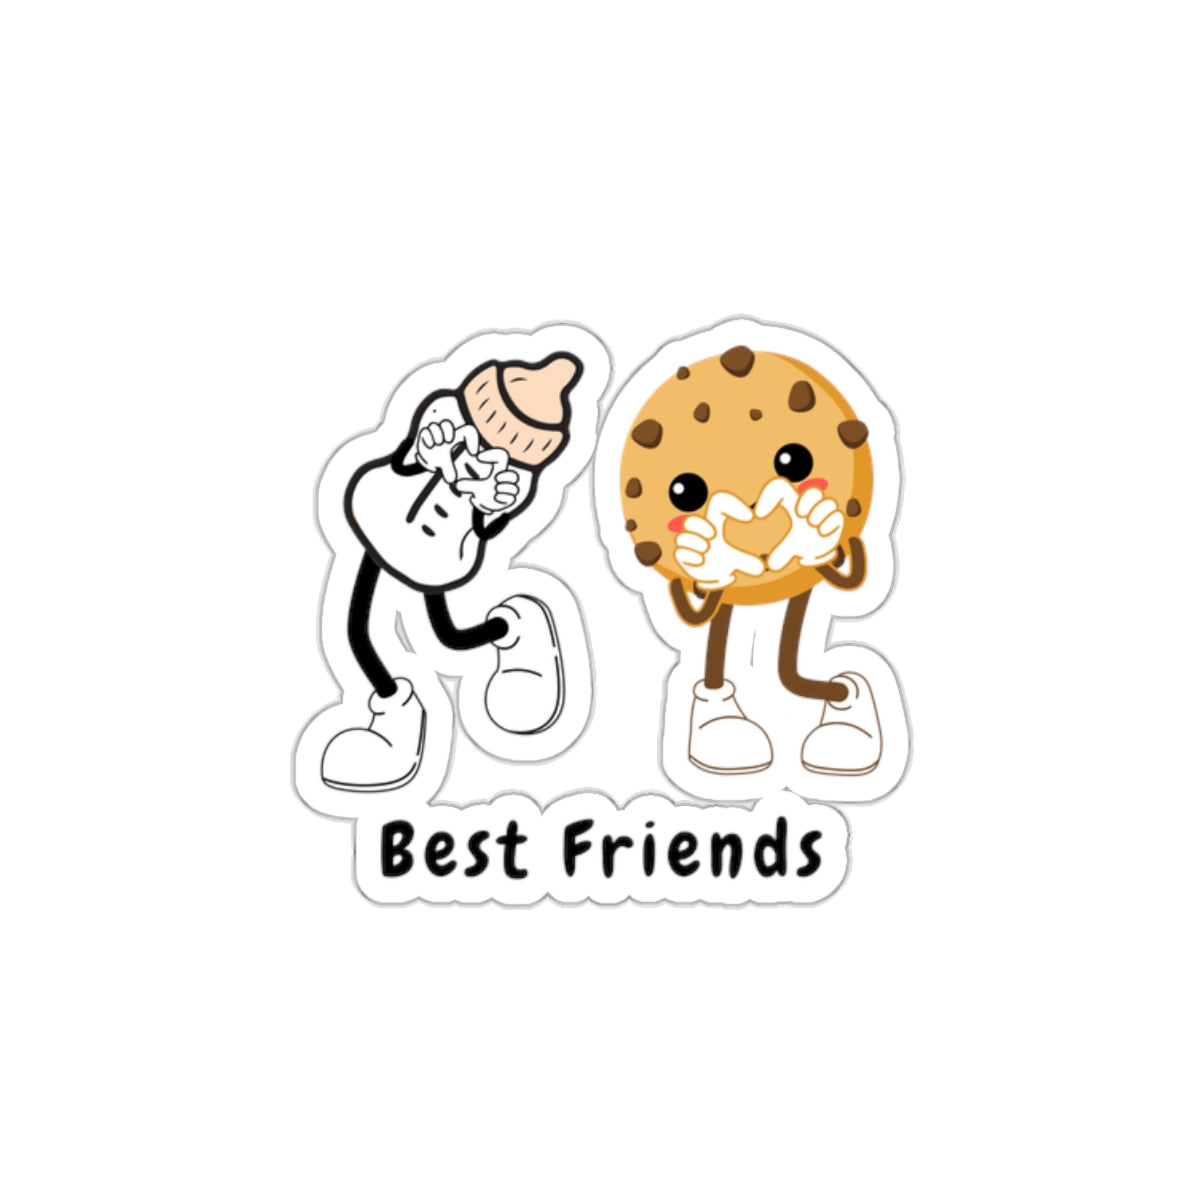 Best Friends Inspirational Quote Kiss-Cut Stickers-Paper products-2" × 2"-White-mysticalcherry